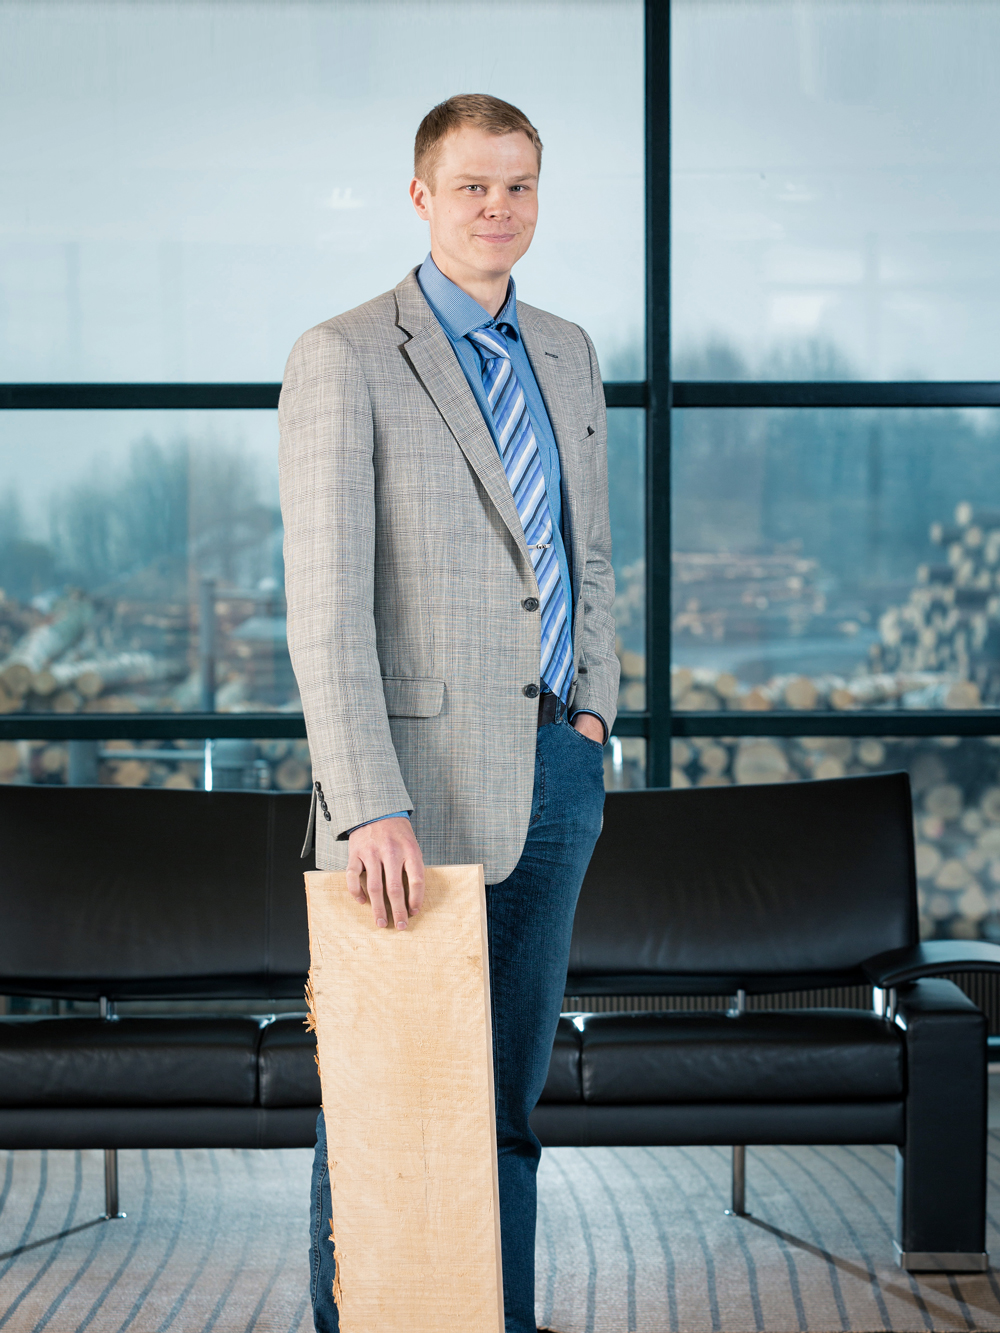 Mr. Jussi Joensuu, head of wood procurement of the Koskitukki company praises the new Forest Act for making “controlled upper-layer thinning” easier. Photo: Koskisen Oy